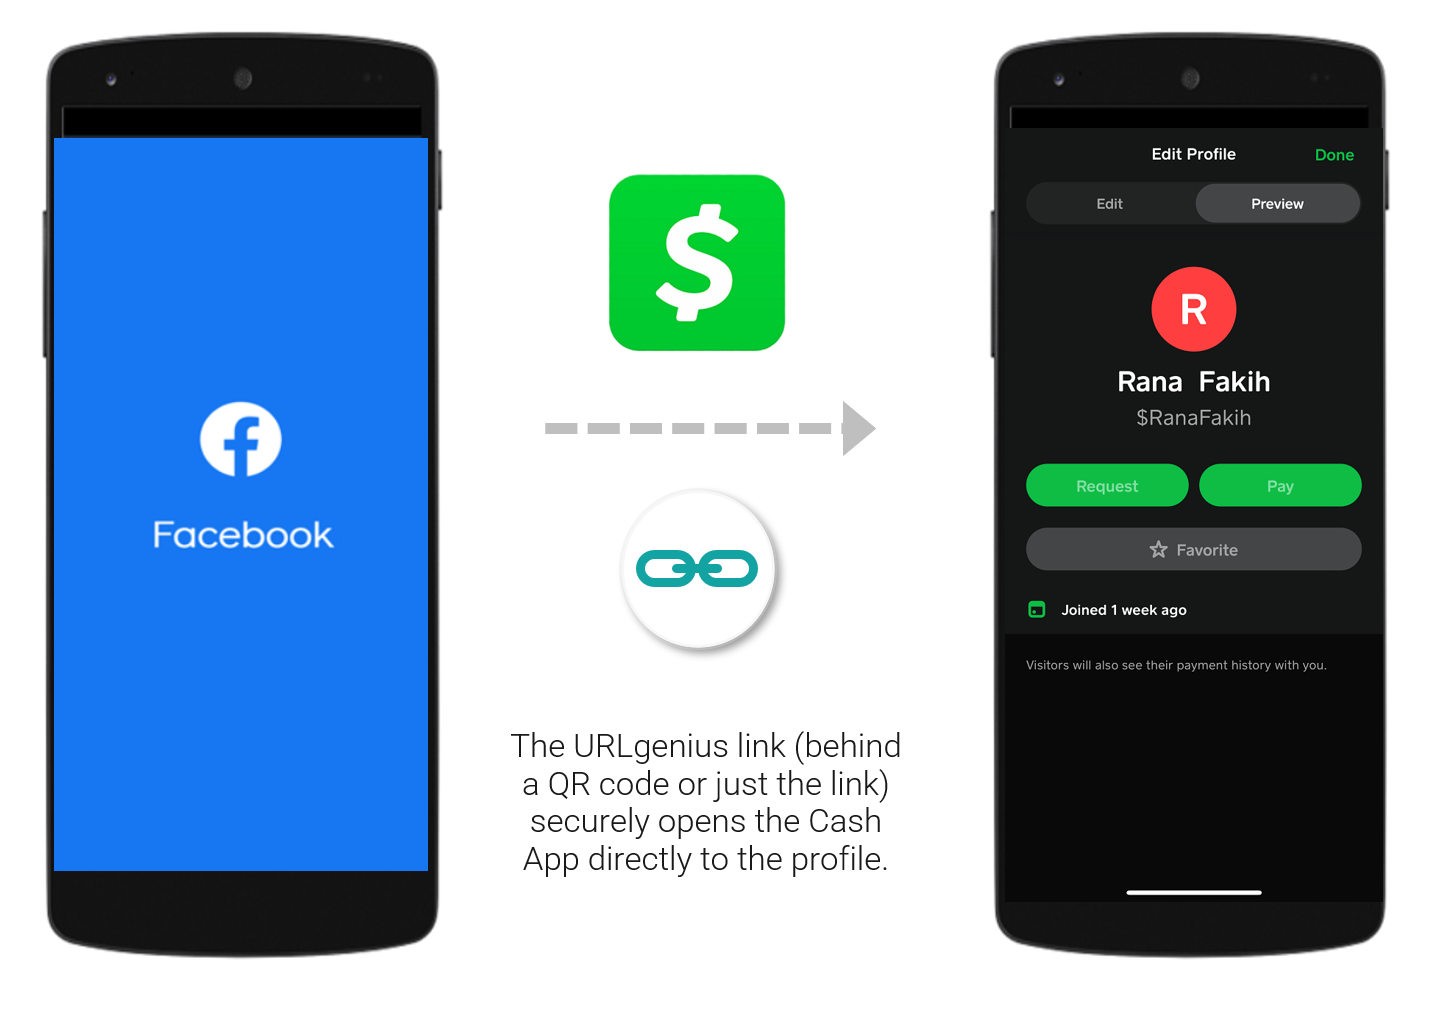 Open An App from Another App: Facebook to Cash App